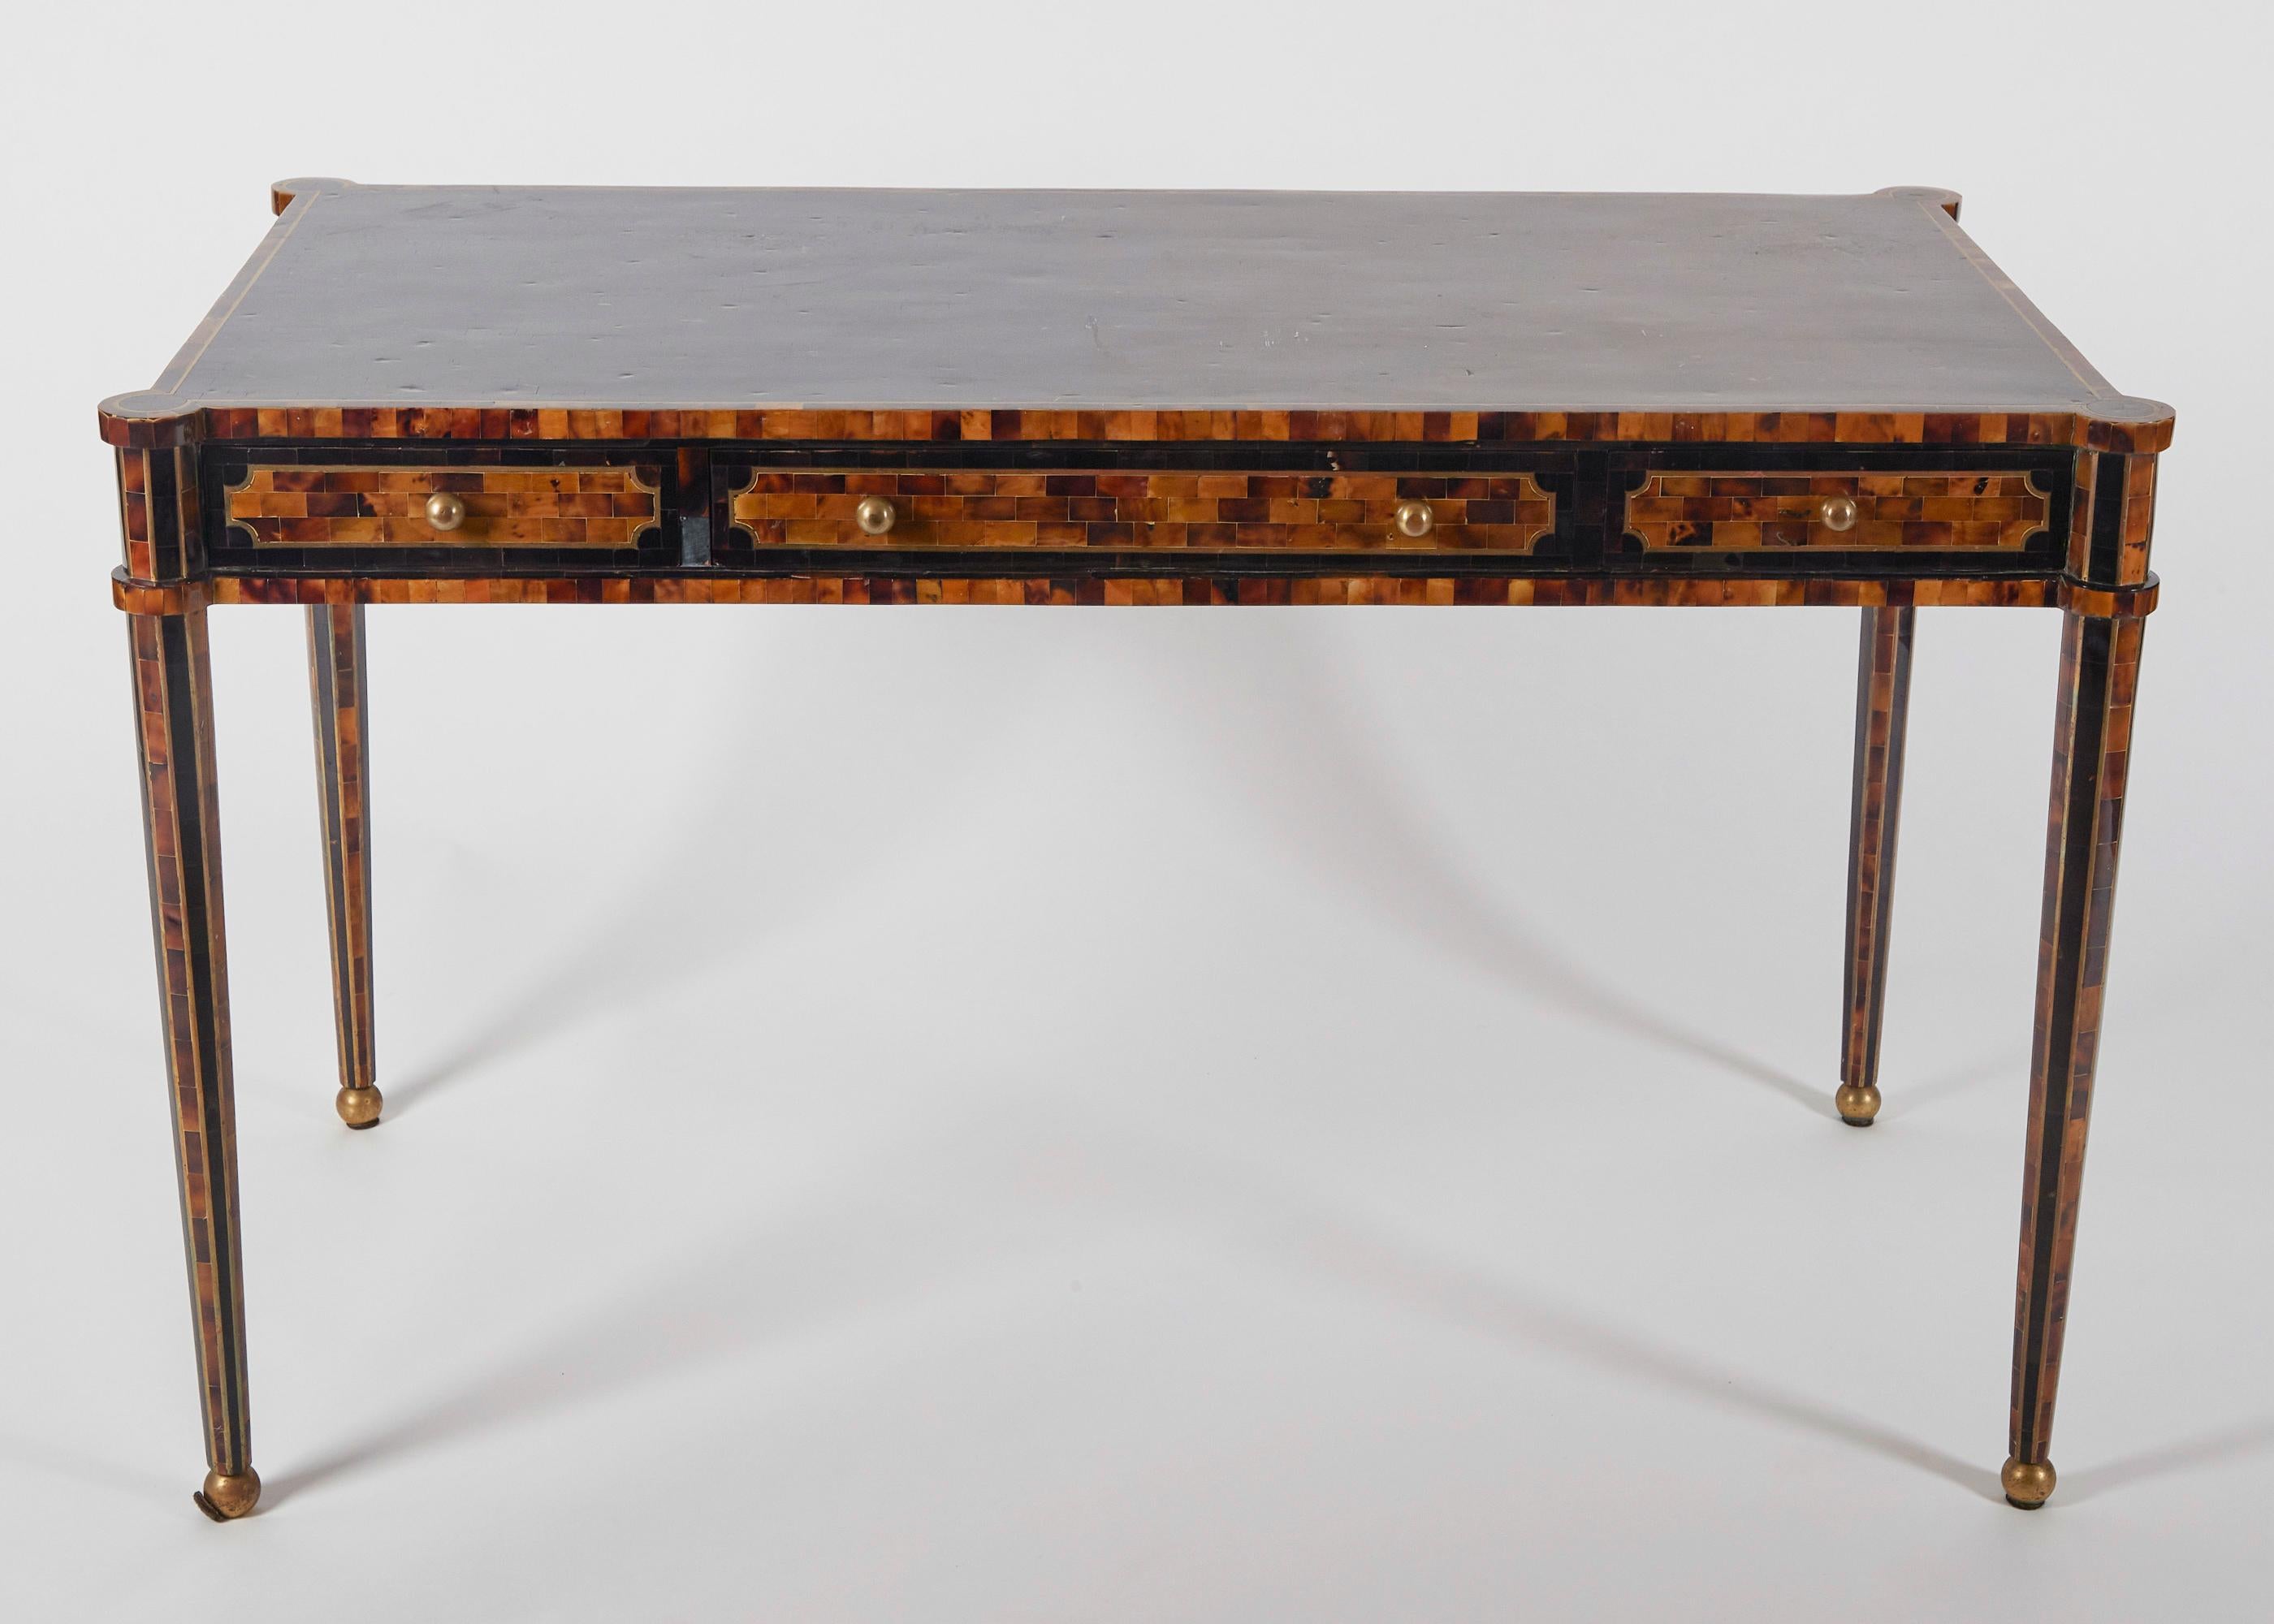 A Maitland-Smith veneered Neoclassical-inspired writing table. Possesses three drawers with brass pulls. Bearing original plaque.